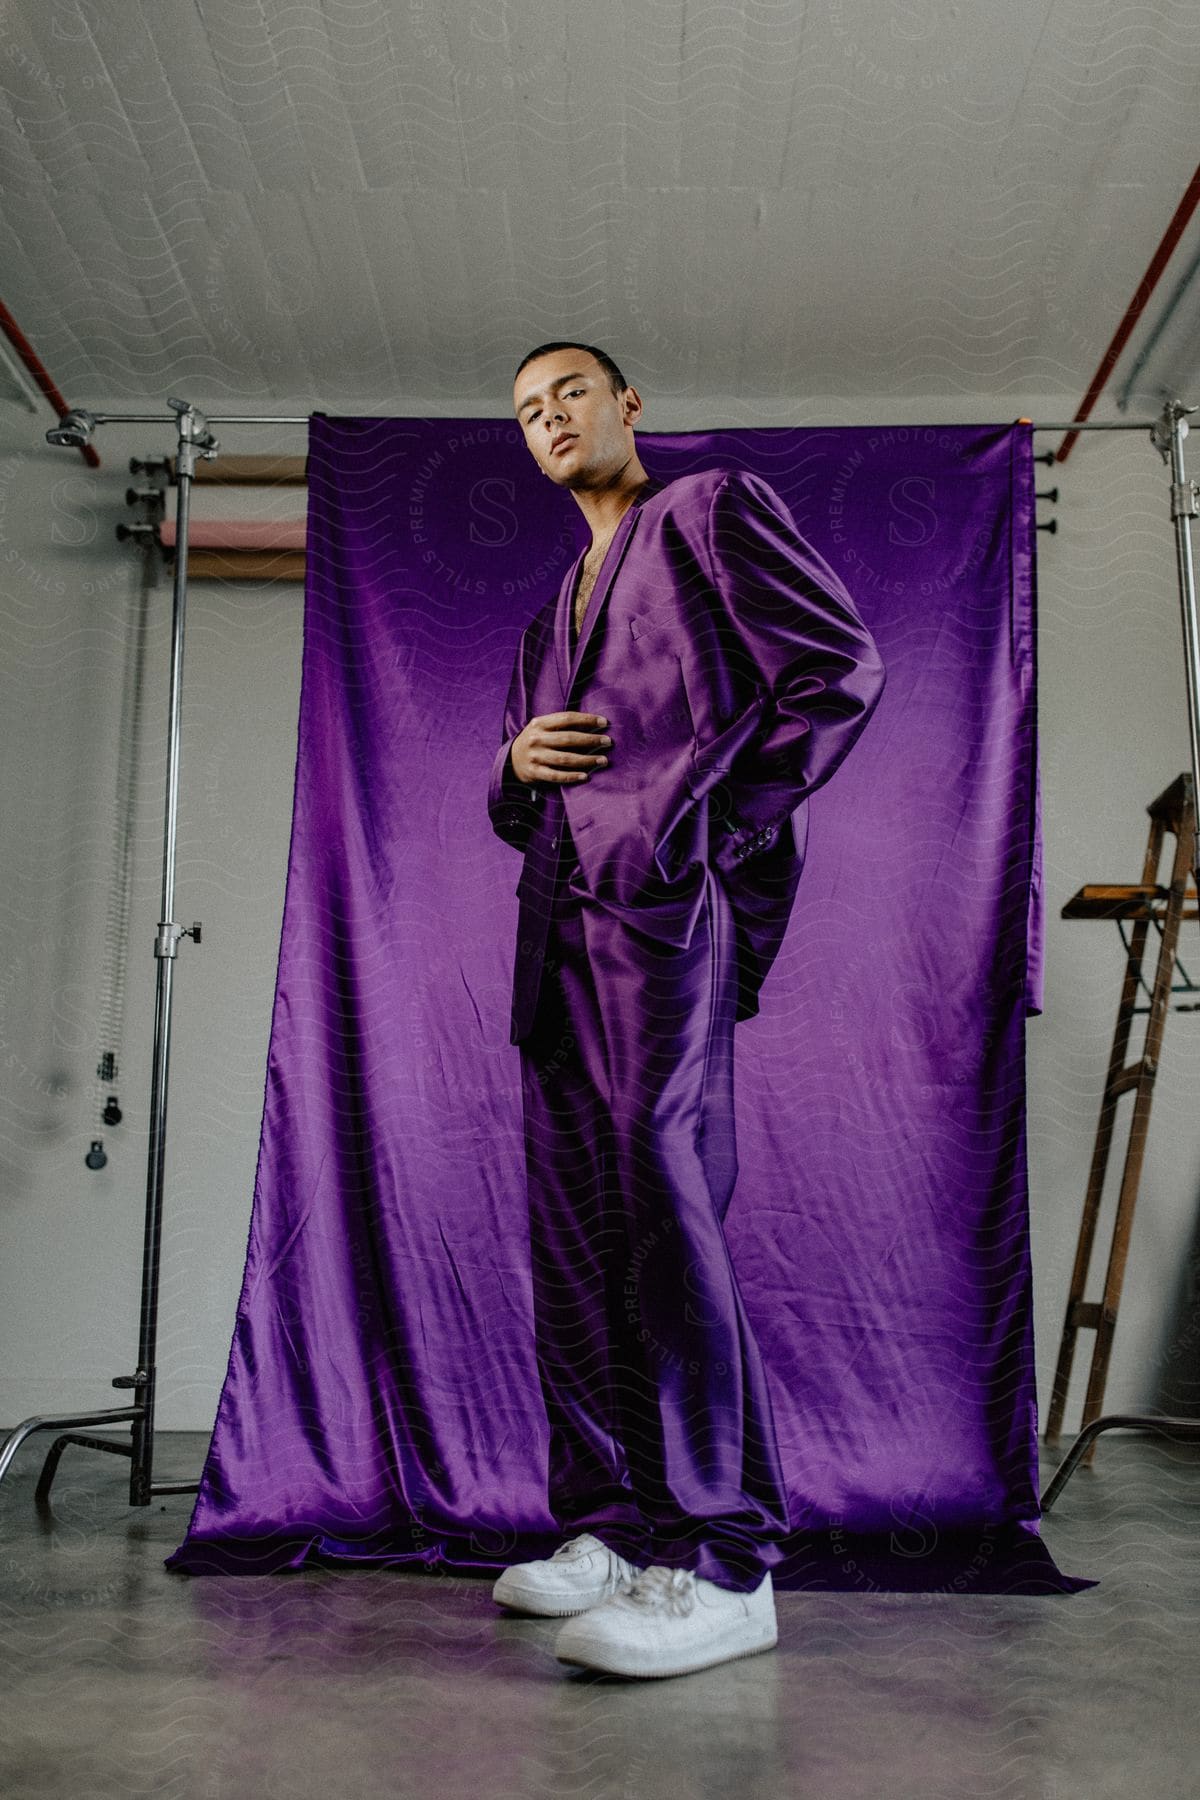 A man in a purple suit stands in front of a purple backdrop in a studio